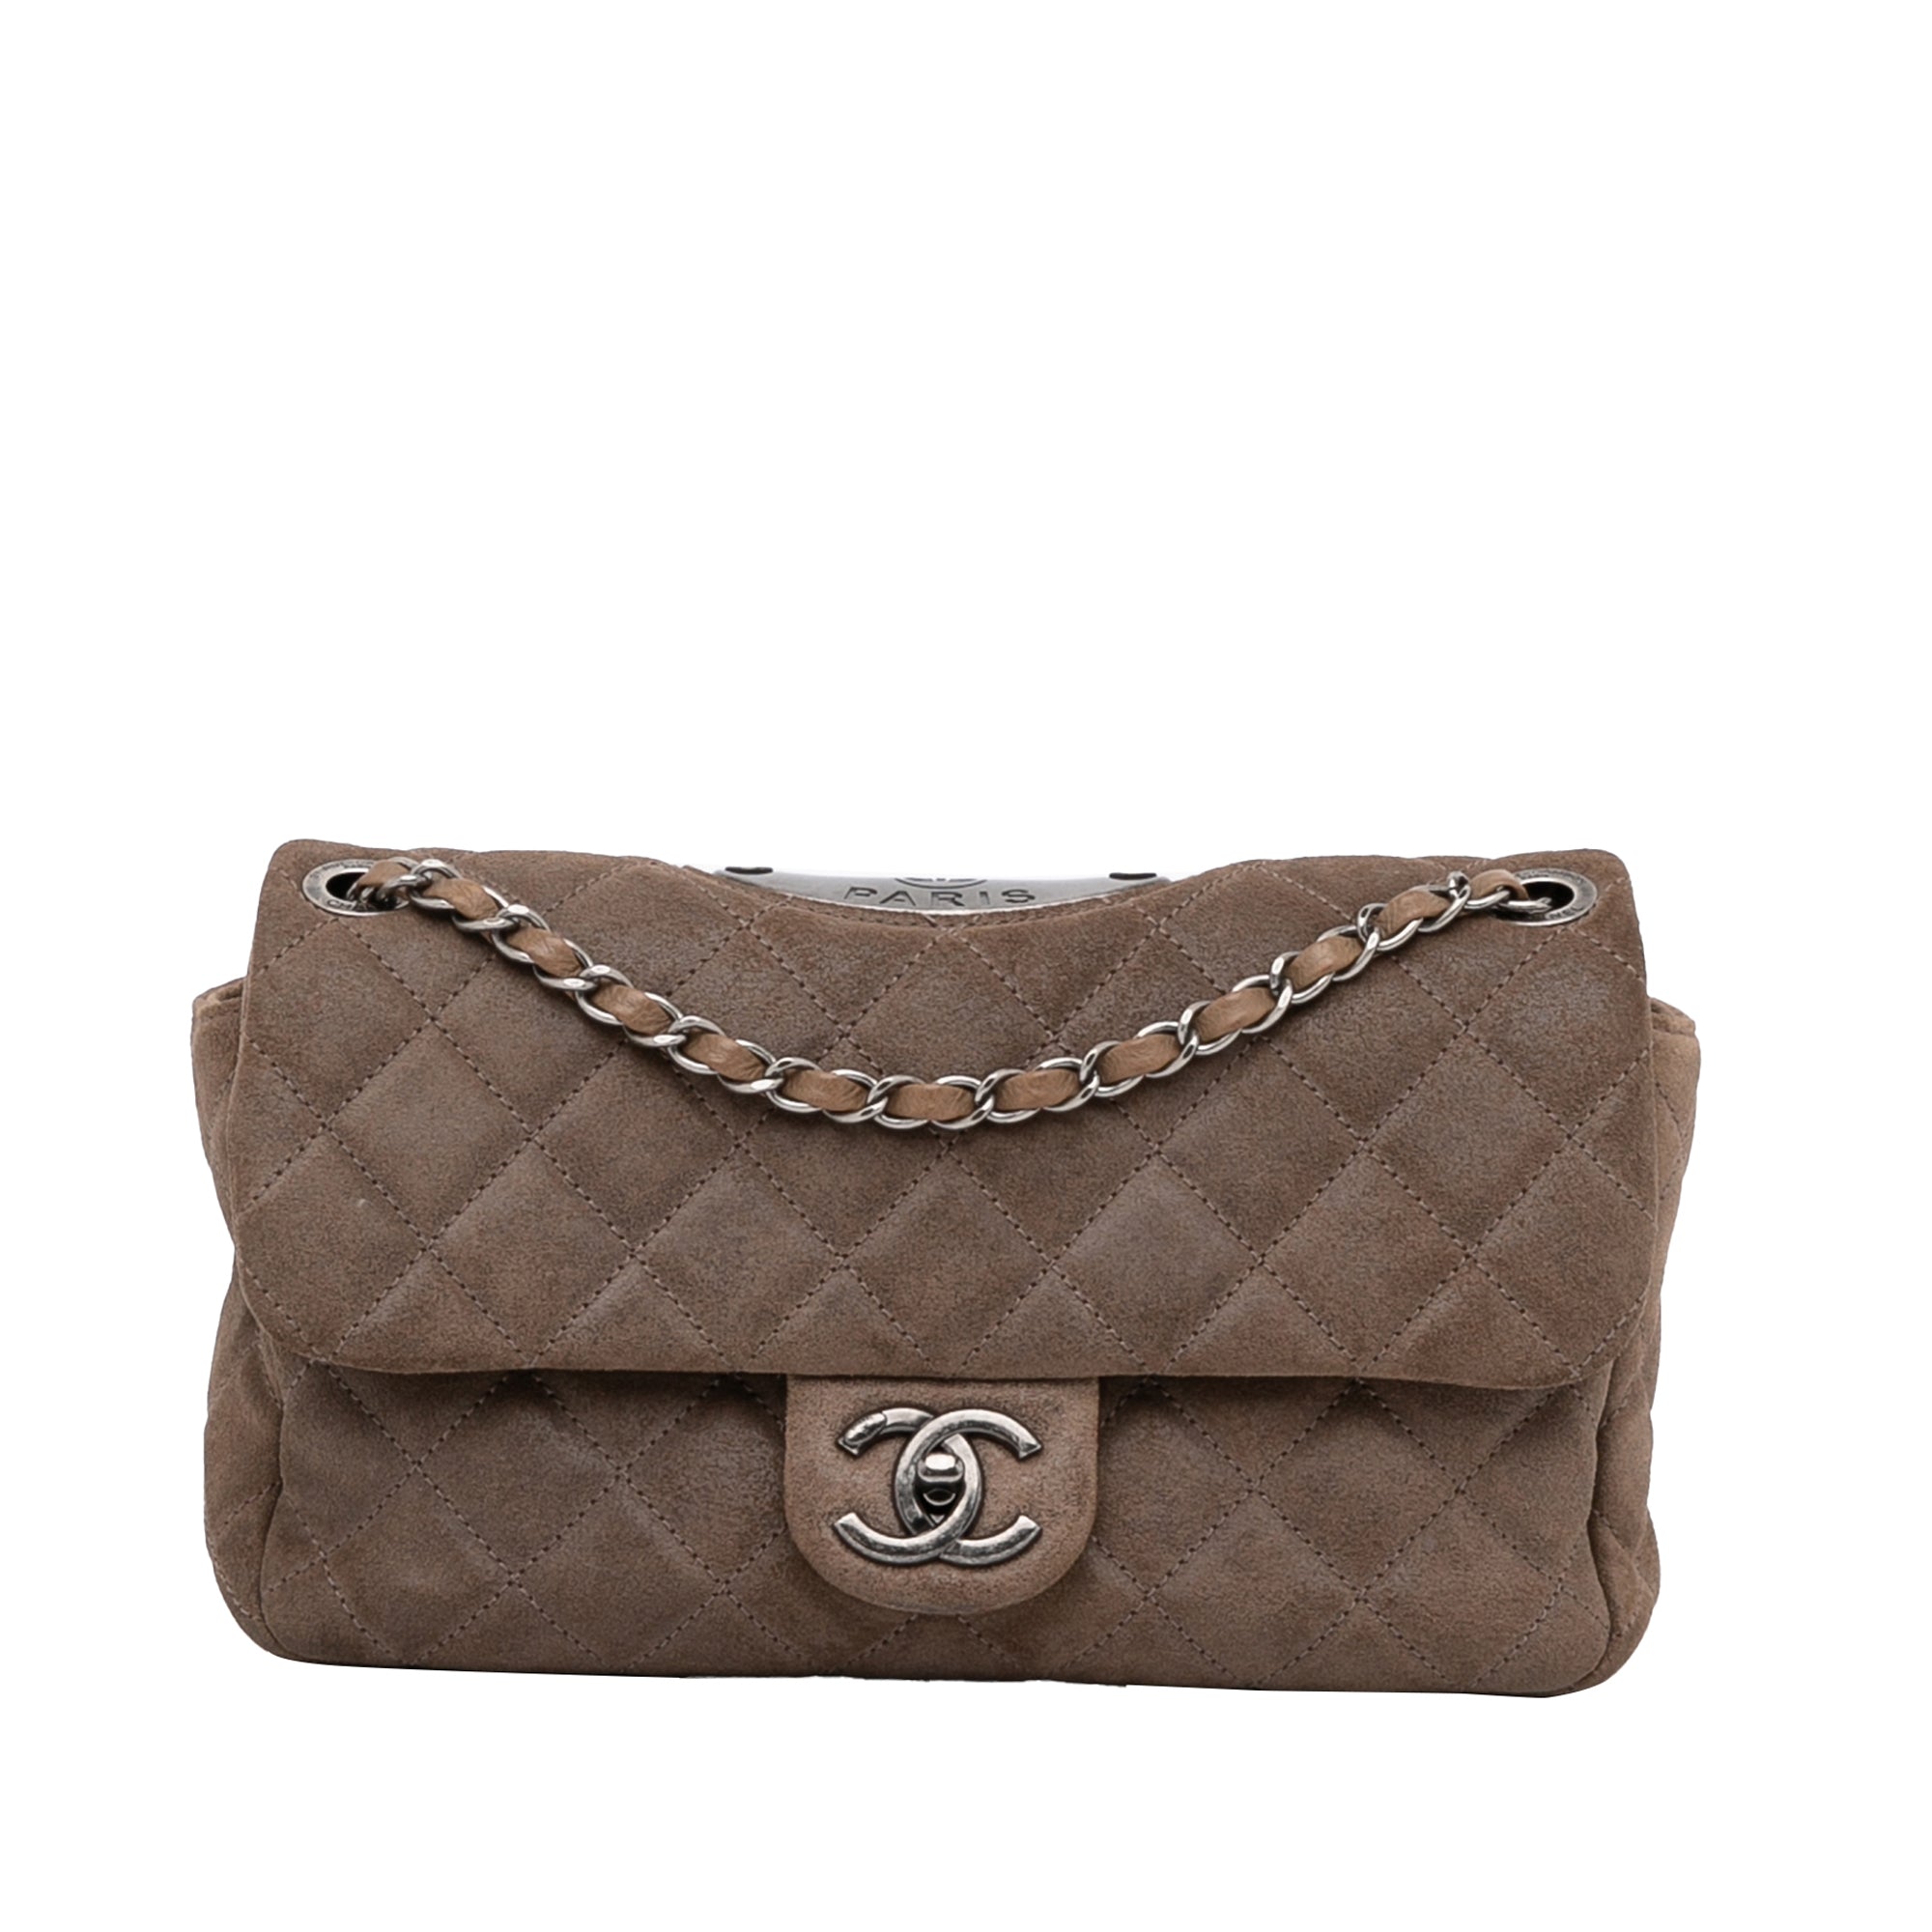 Chanel Taupe Quilted Matte Caviar Classic Maxi Double Flap Silver